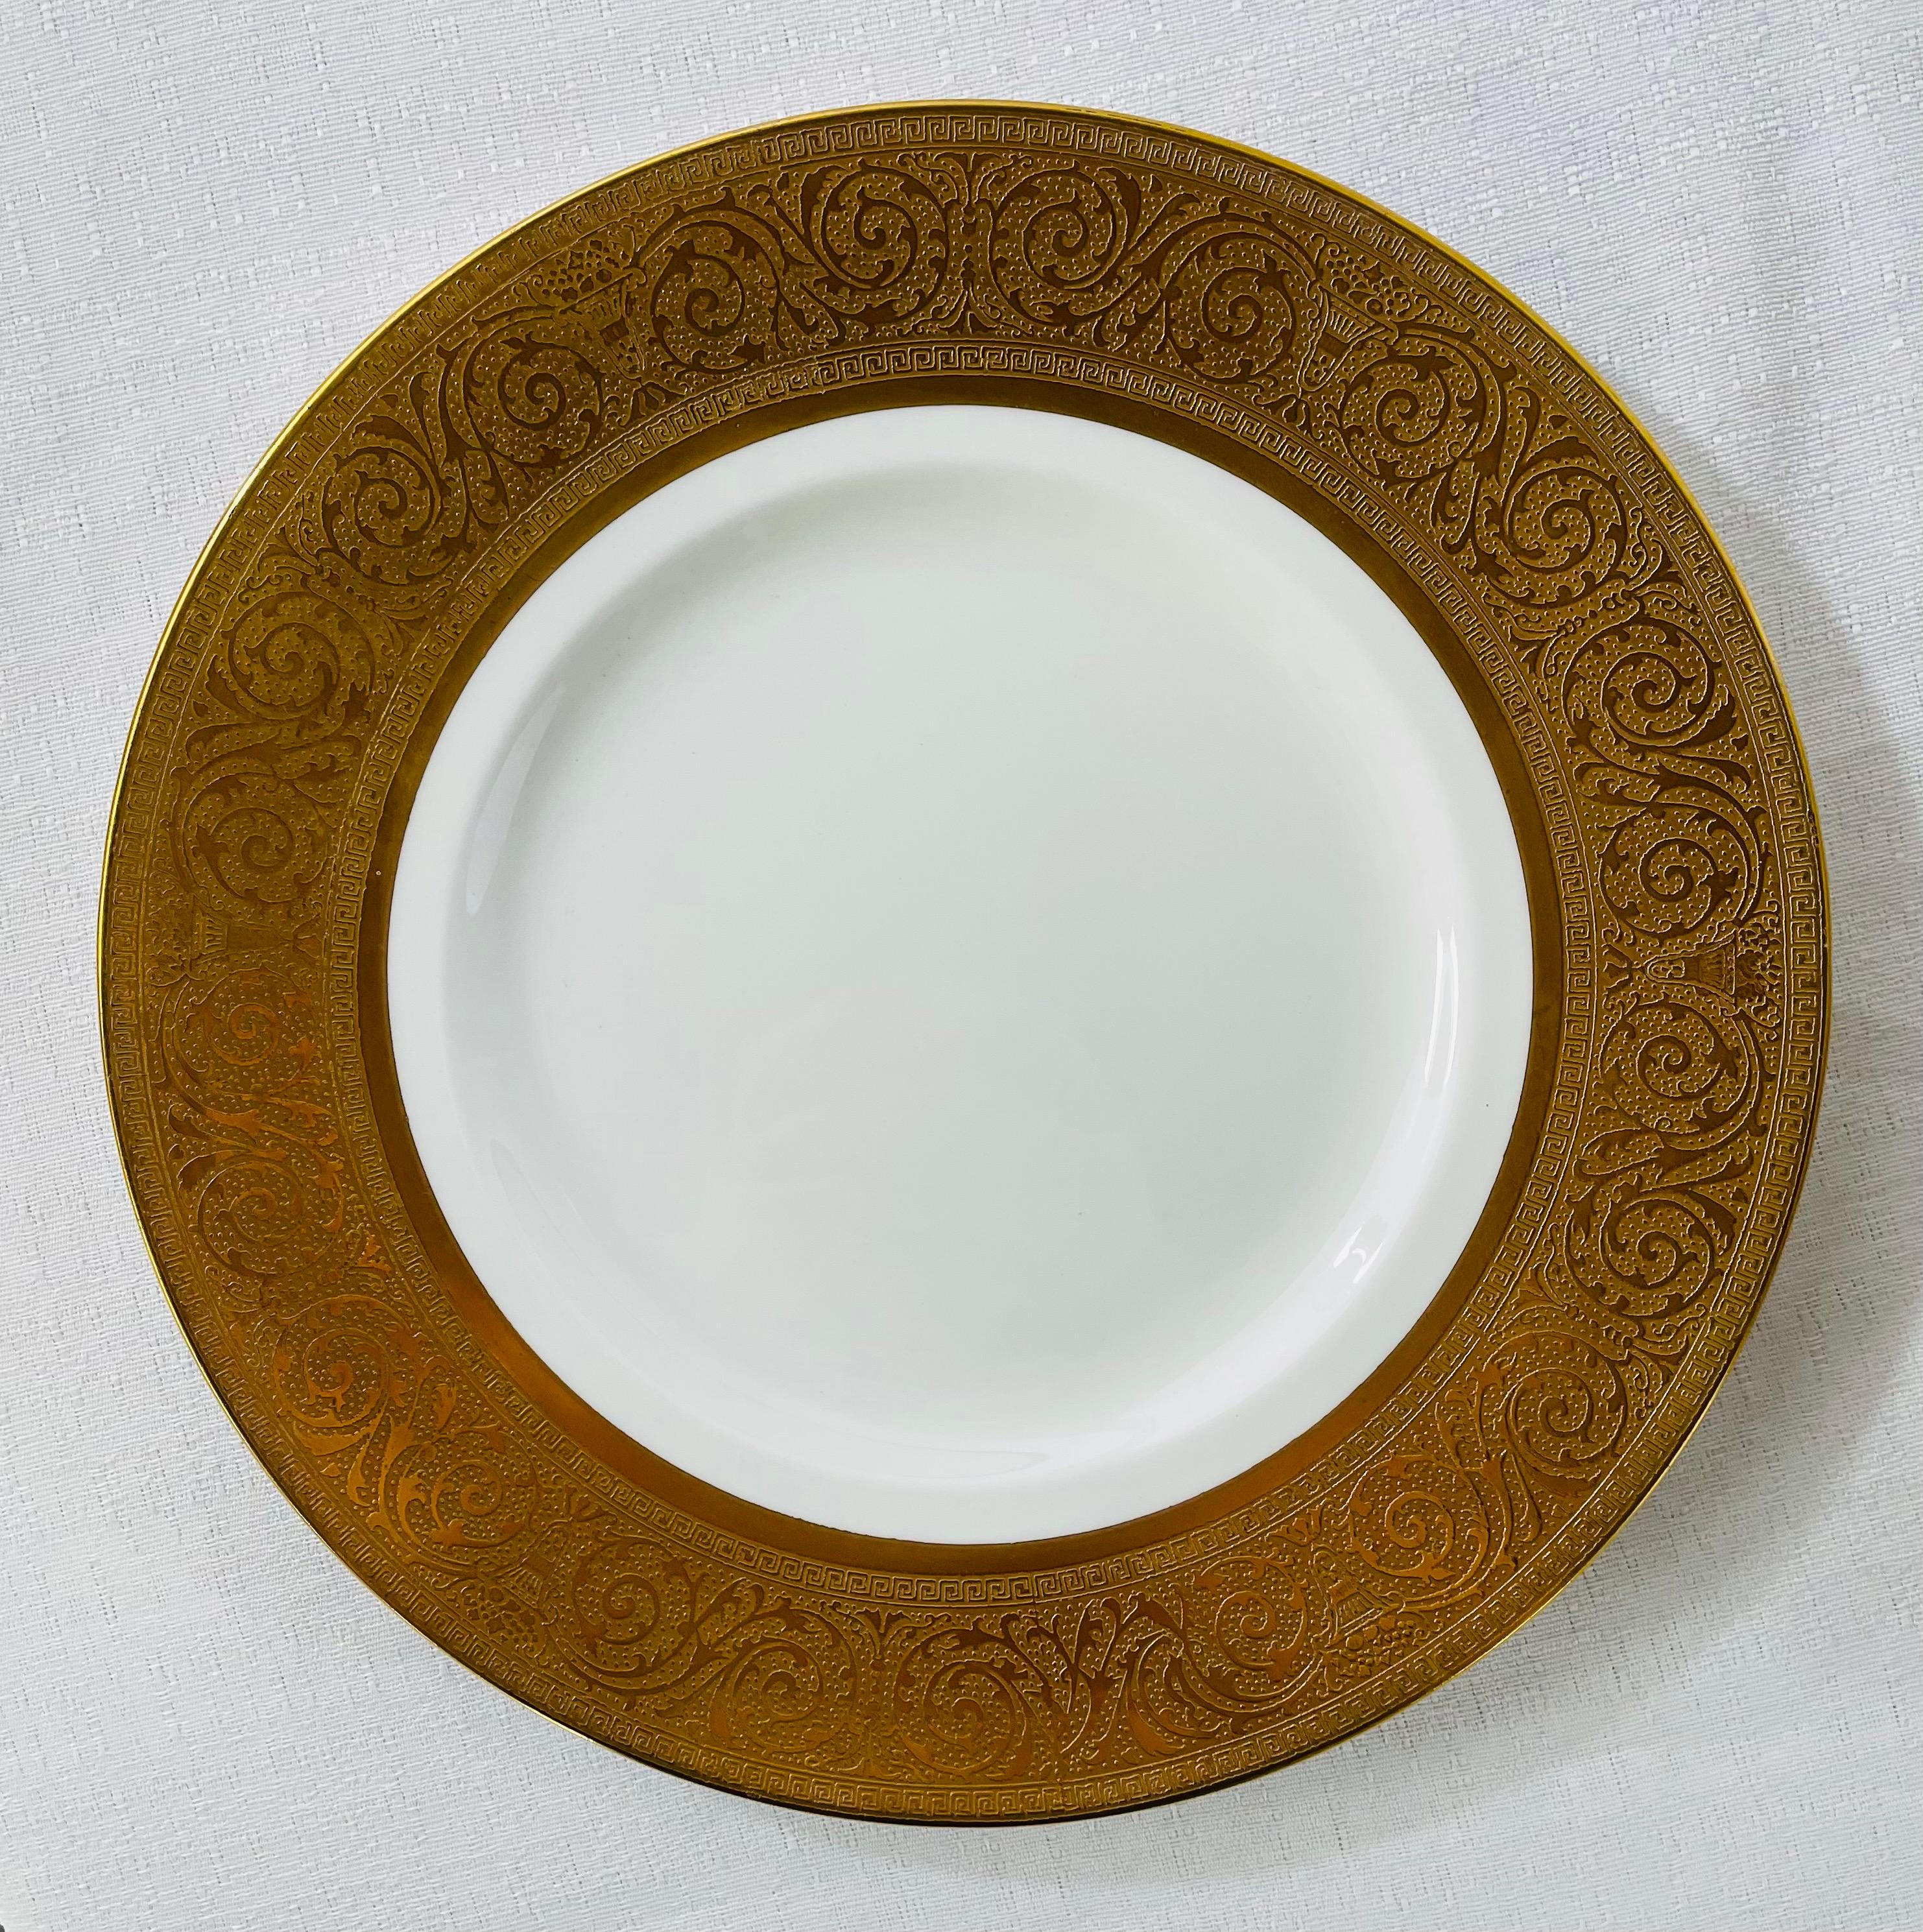 A set of 12 Shelley dining plates with gold trim and beautiful design. Each plate is stamped in the back. 
Dimensions: 11